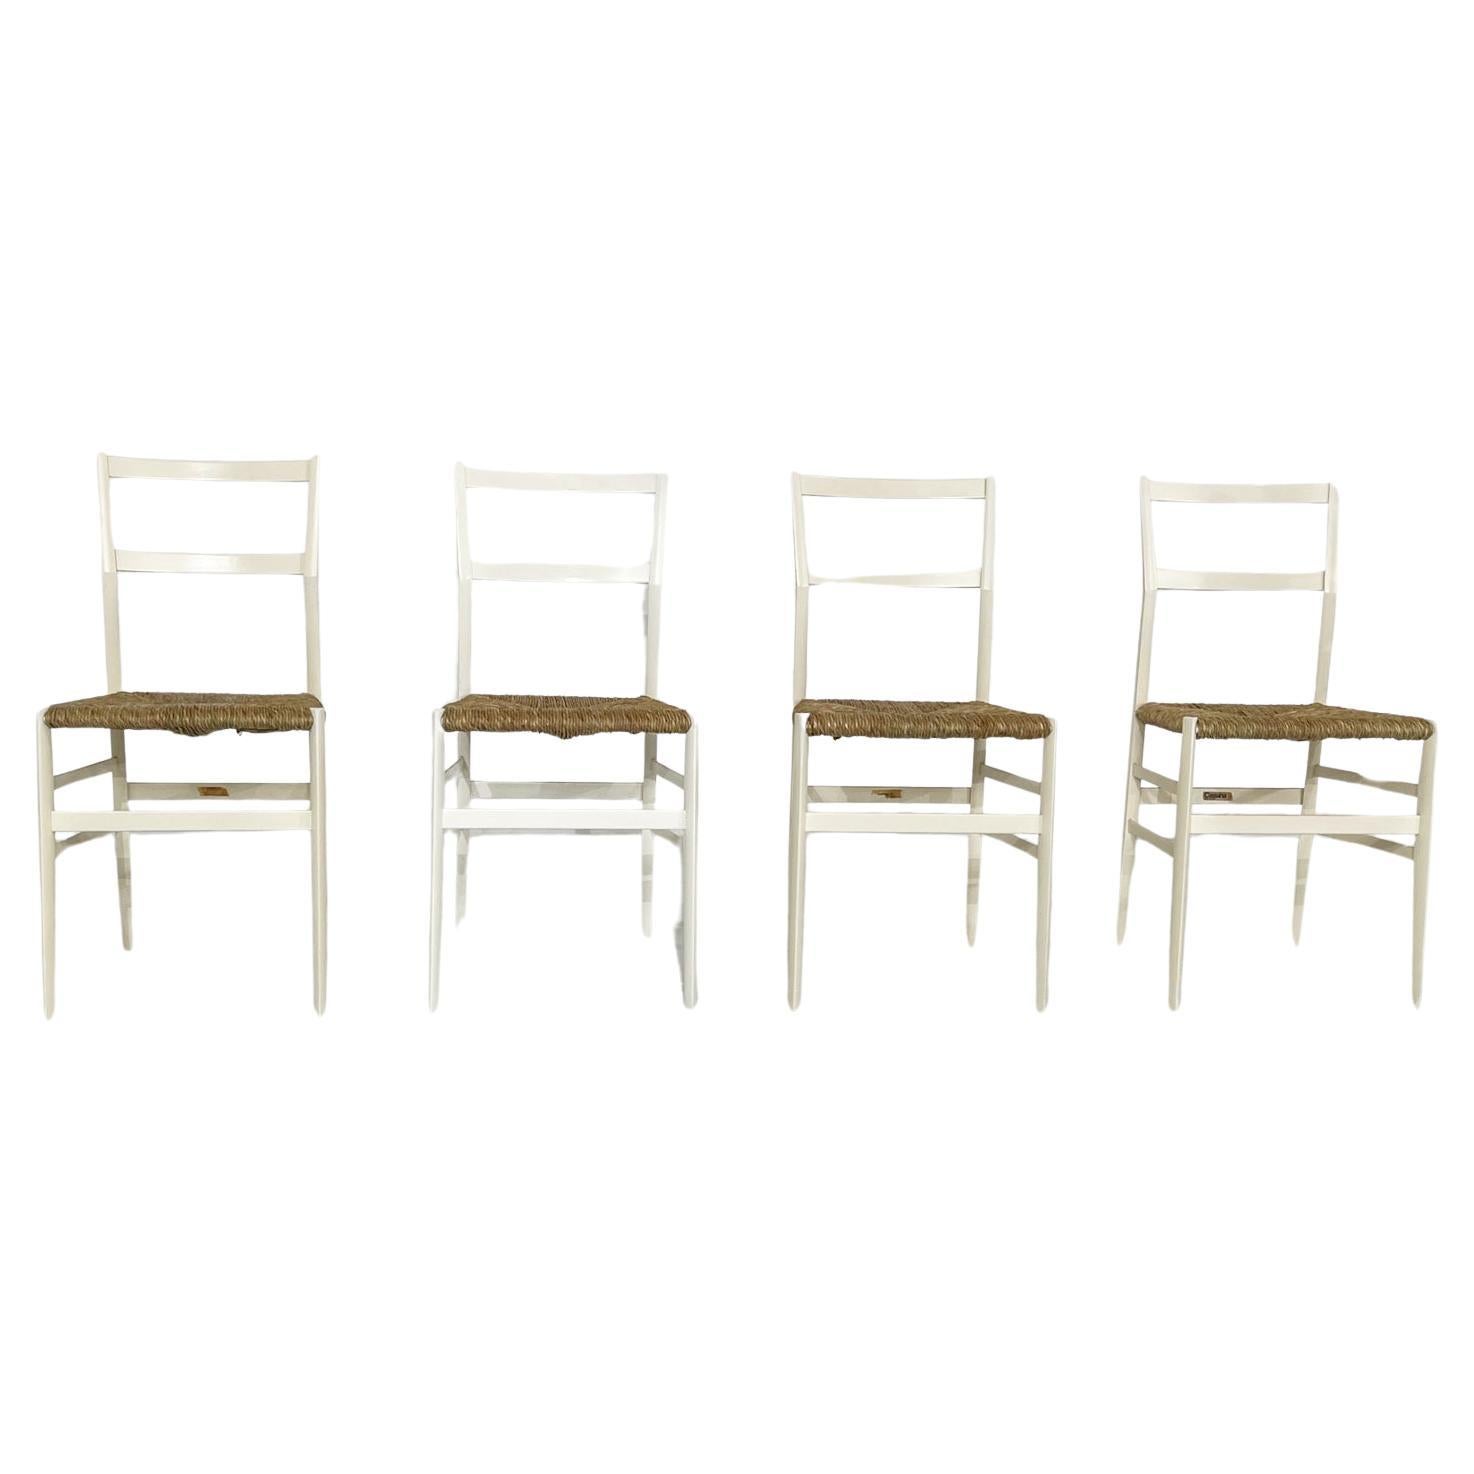 AMazing Set of 4 SuperLeggera chairs by Gio Ponti for Cassina - 1950 For Sale